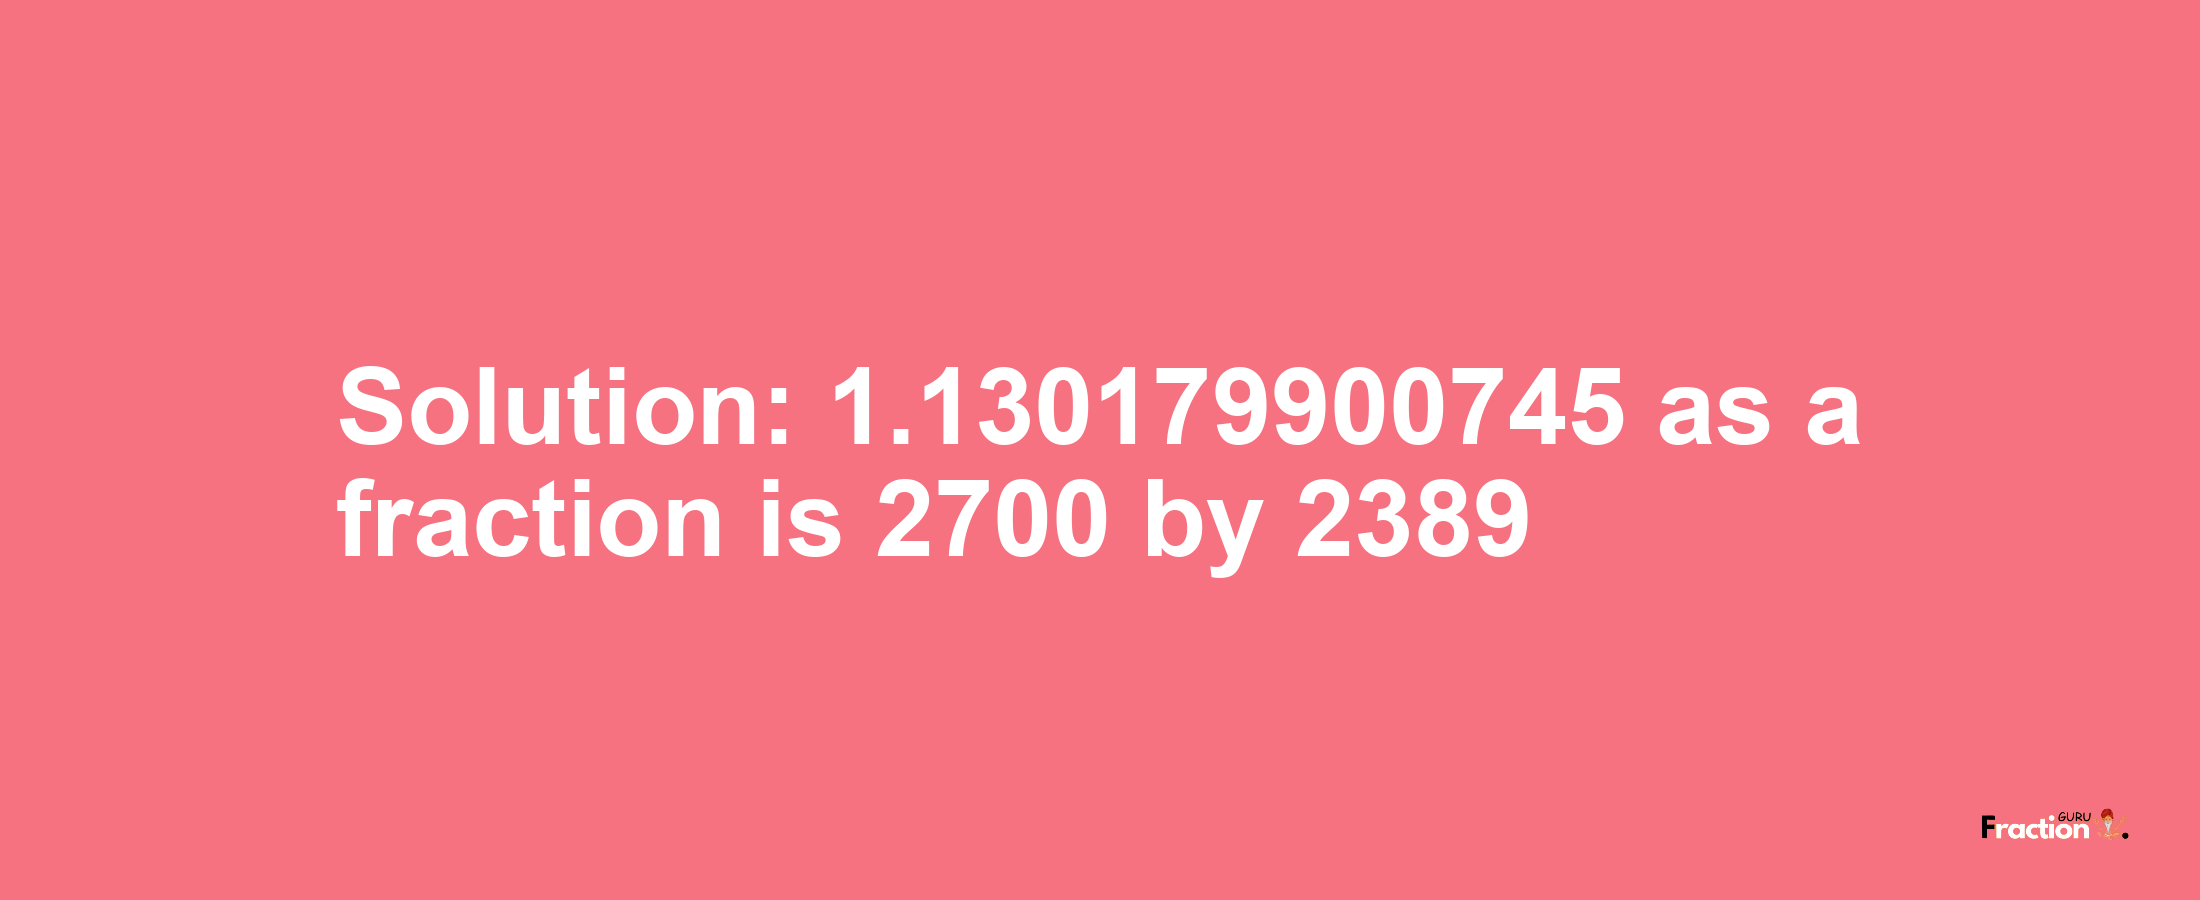 Solution:1.130179900745 as a fraction is 2700/2389